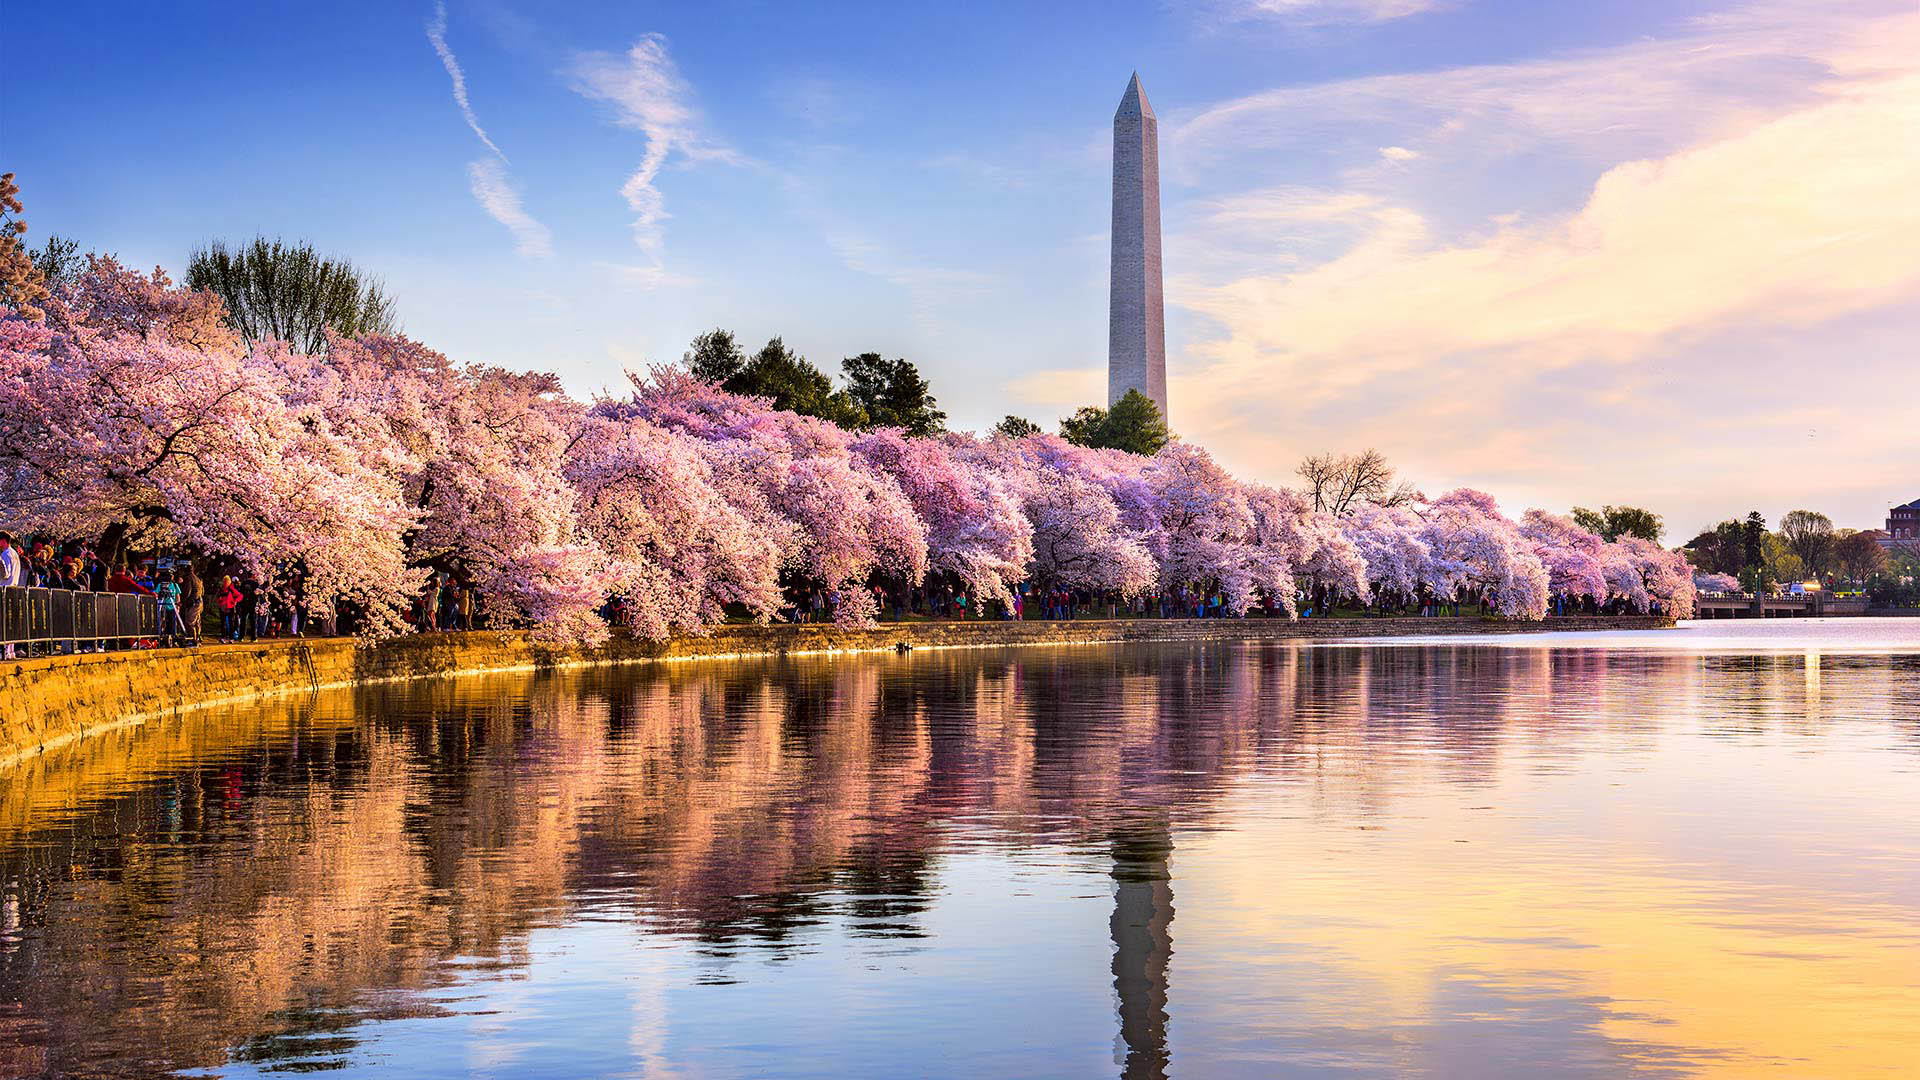 Cherry blossoms in bloom along the Tidal Basin with the Washington Monument in the background.